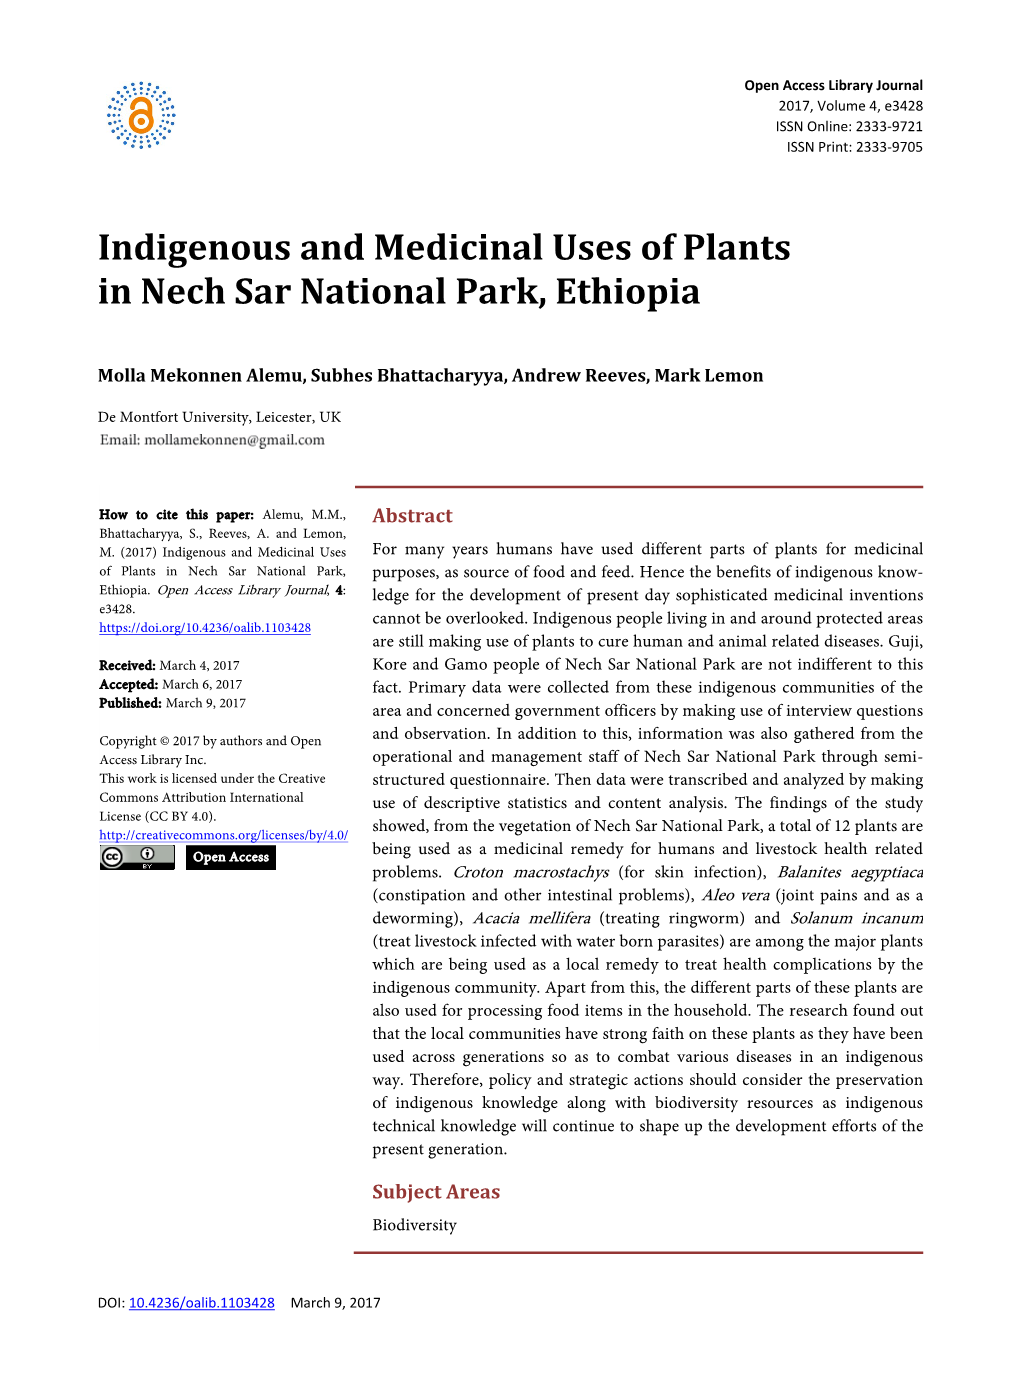 Indigenous and Medicinal Uses of Plants in Nech Sar National Park, Ethiopia